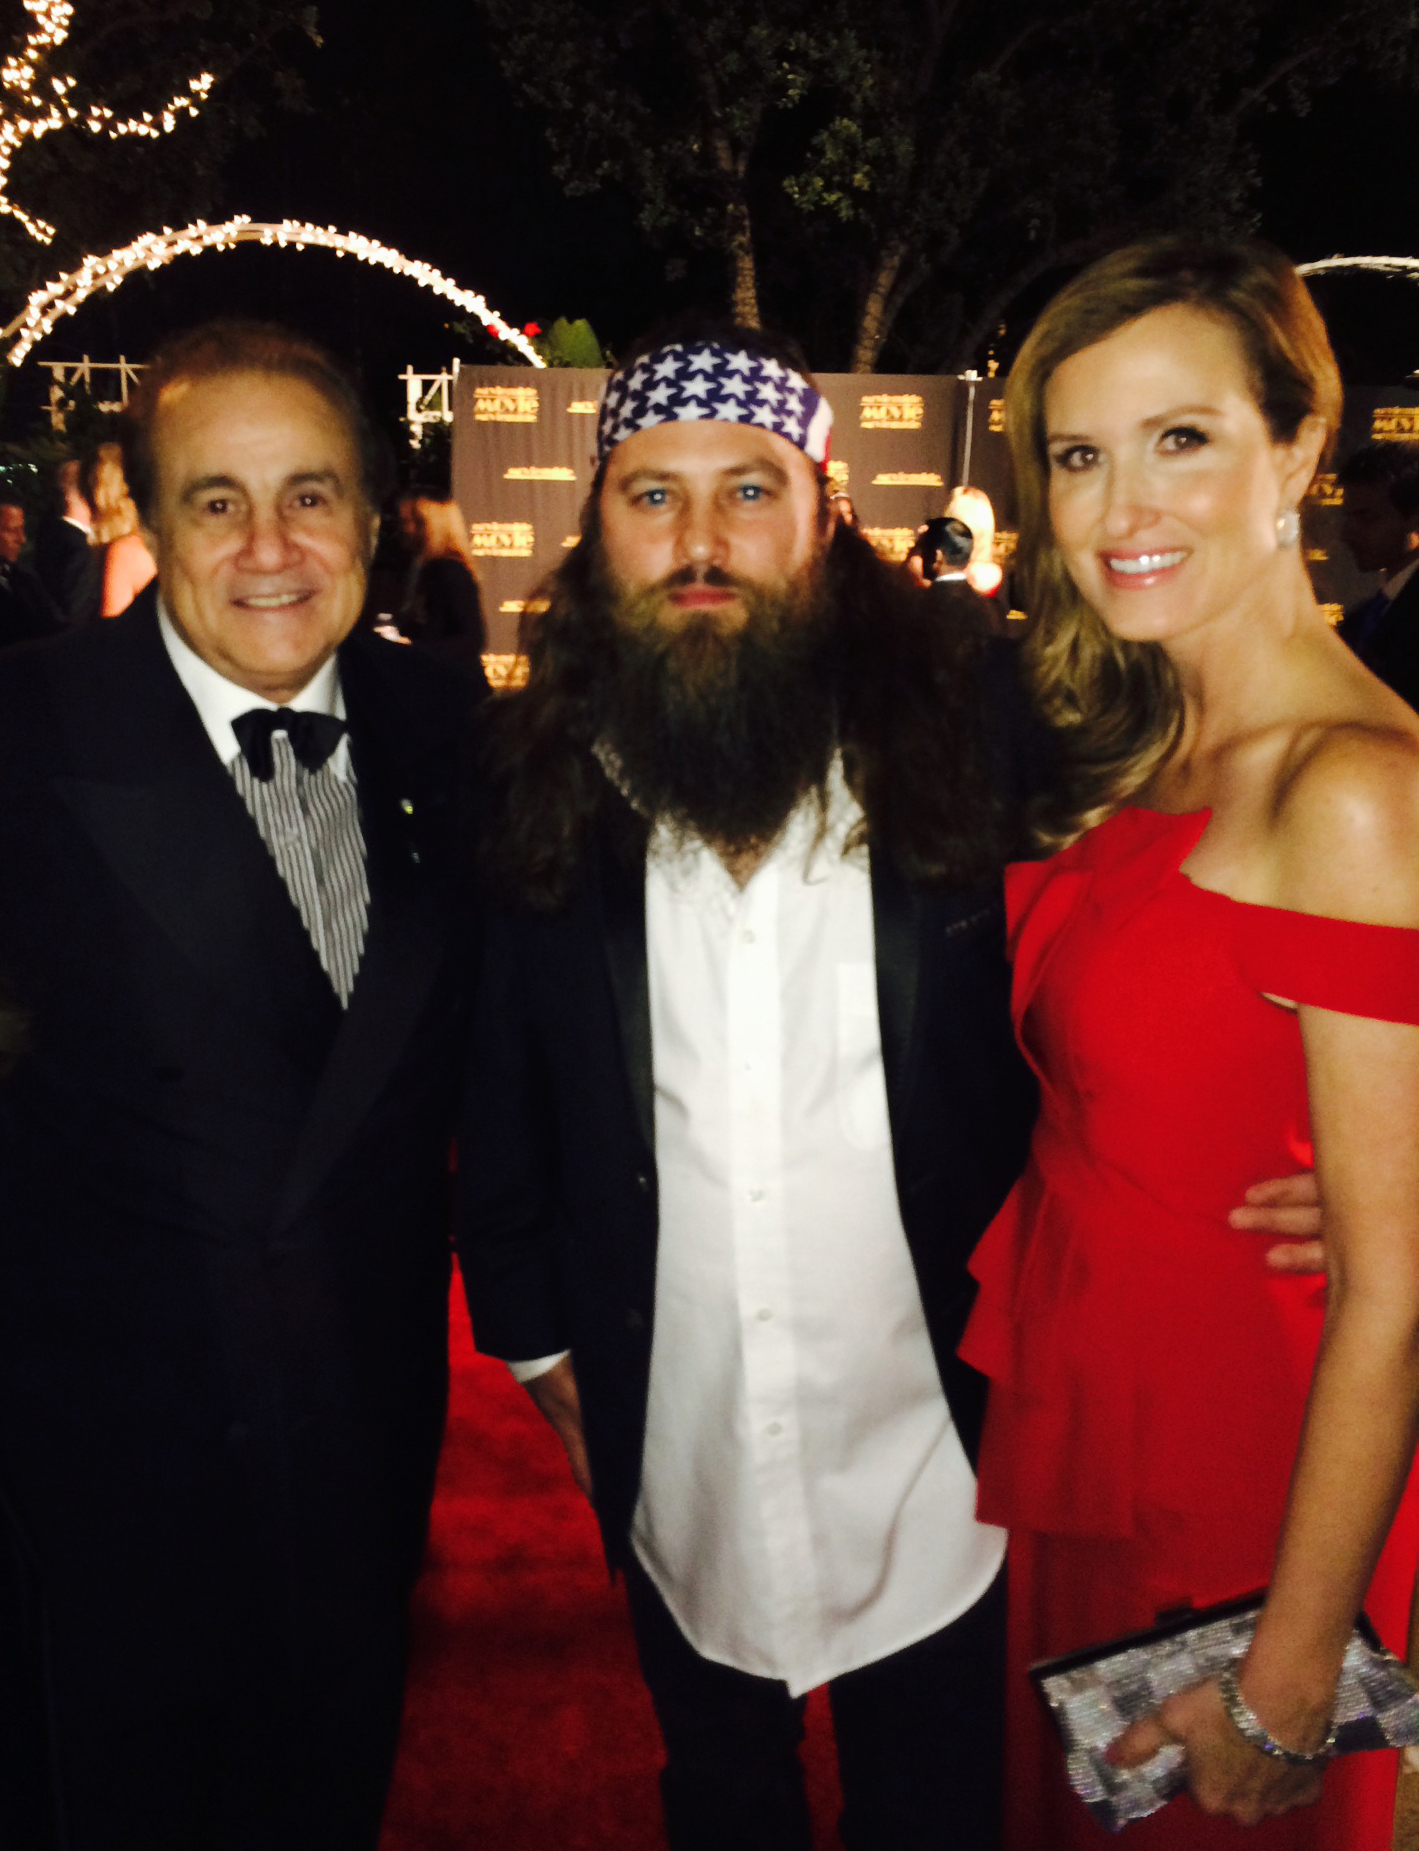 Executive Producer Larry Thompson (L) with Willie Robertson (Center) and Korie Robertson (R) at the 22nd Annual Movieguide Awards held at the Sierra Ballroom at the Universal Hilton, Universal City, CA on February 7, 2014.